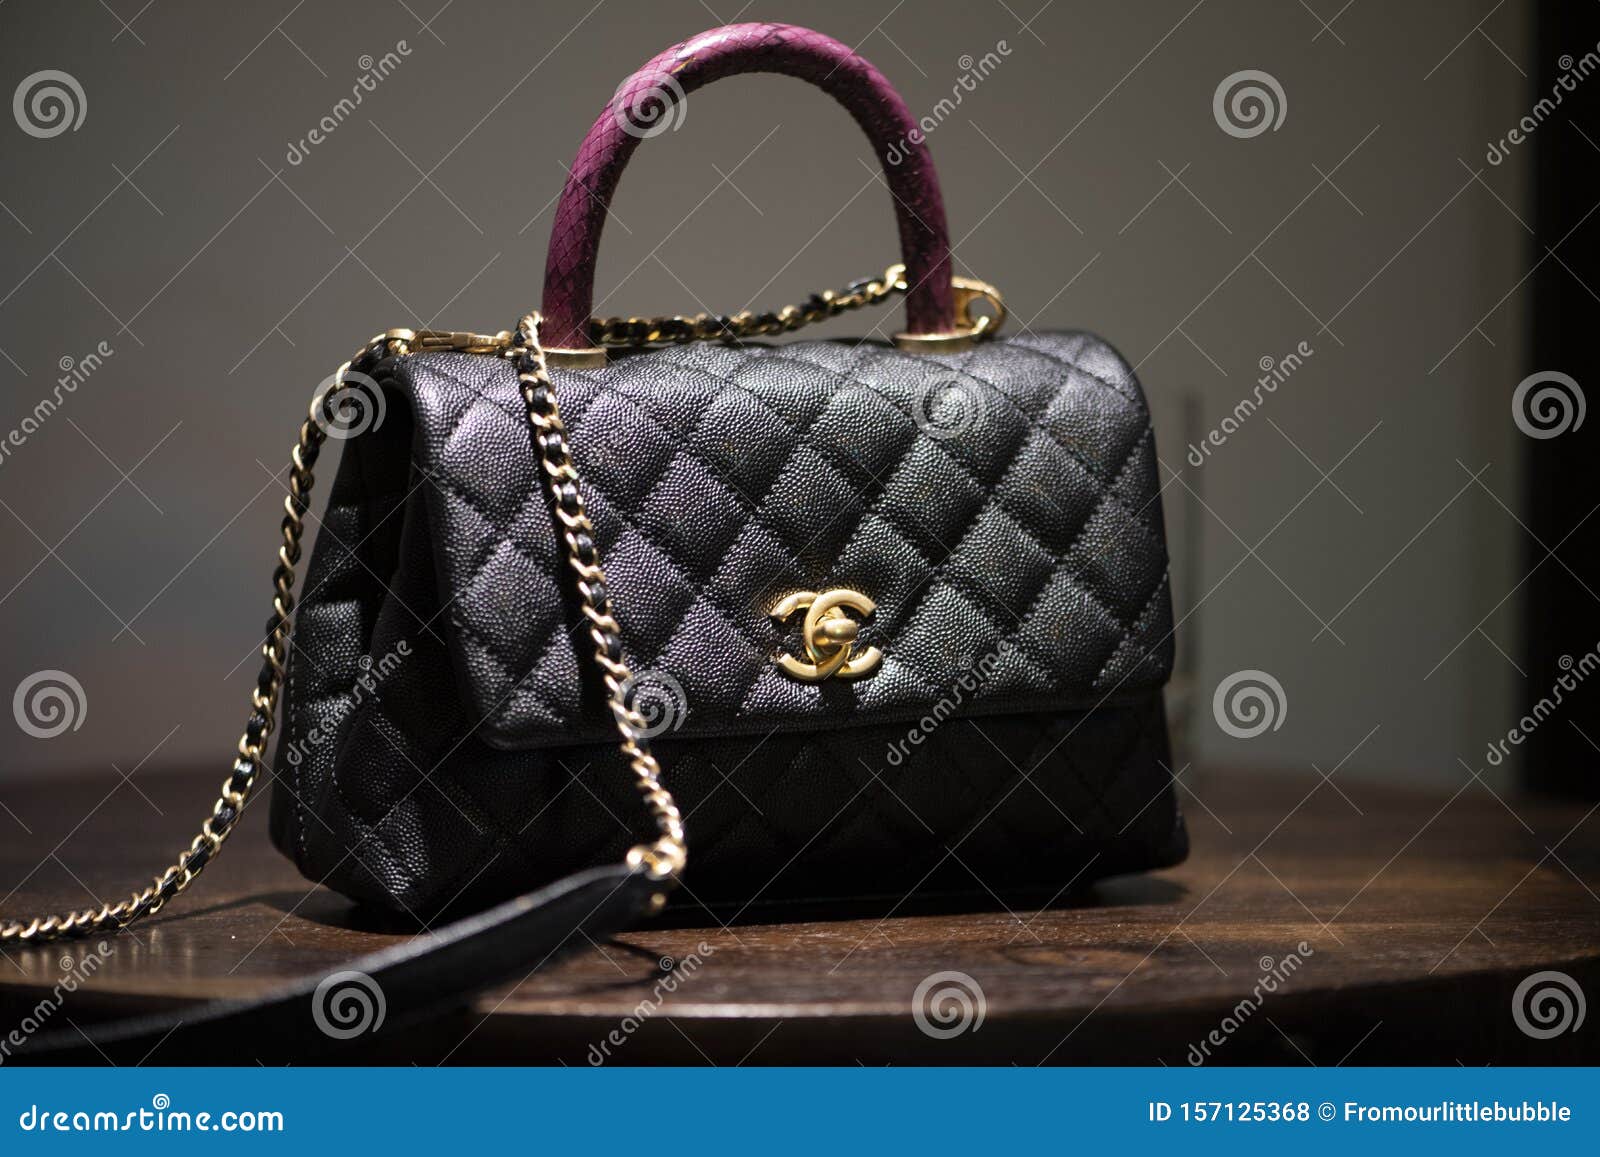 Authentic Black Chanel Bag Sitting on Table Editorial Stock Photo